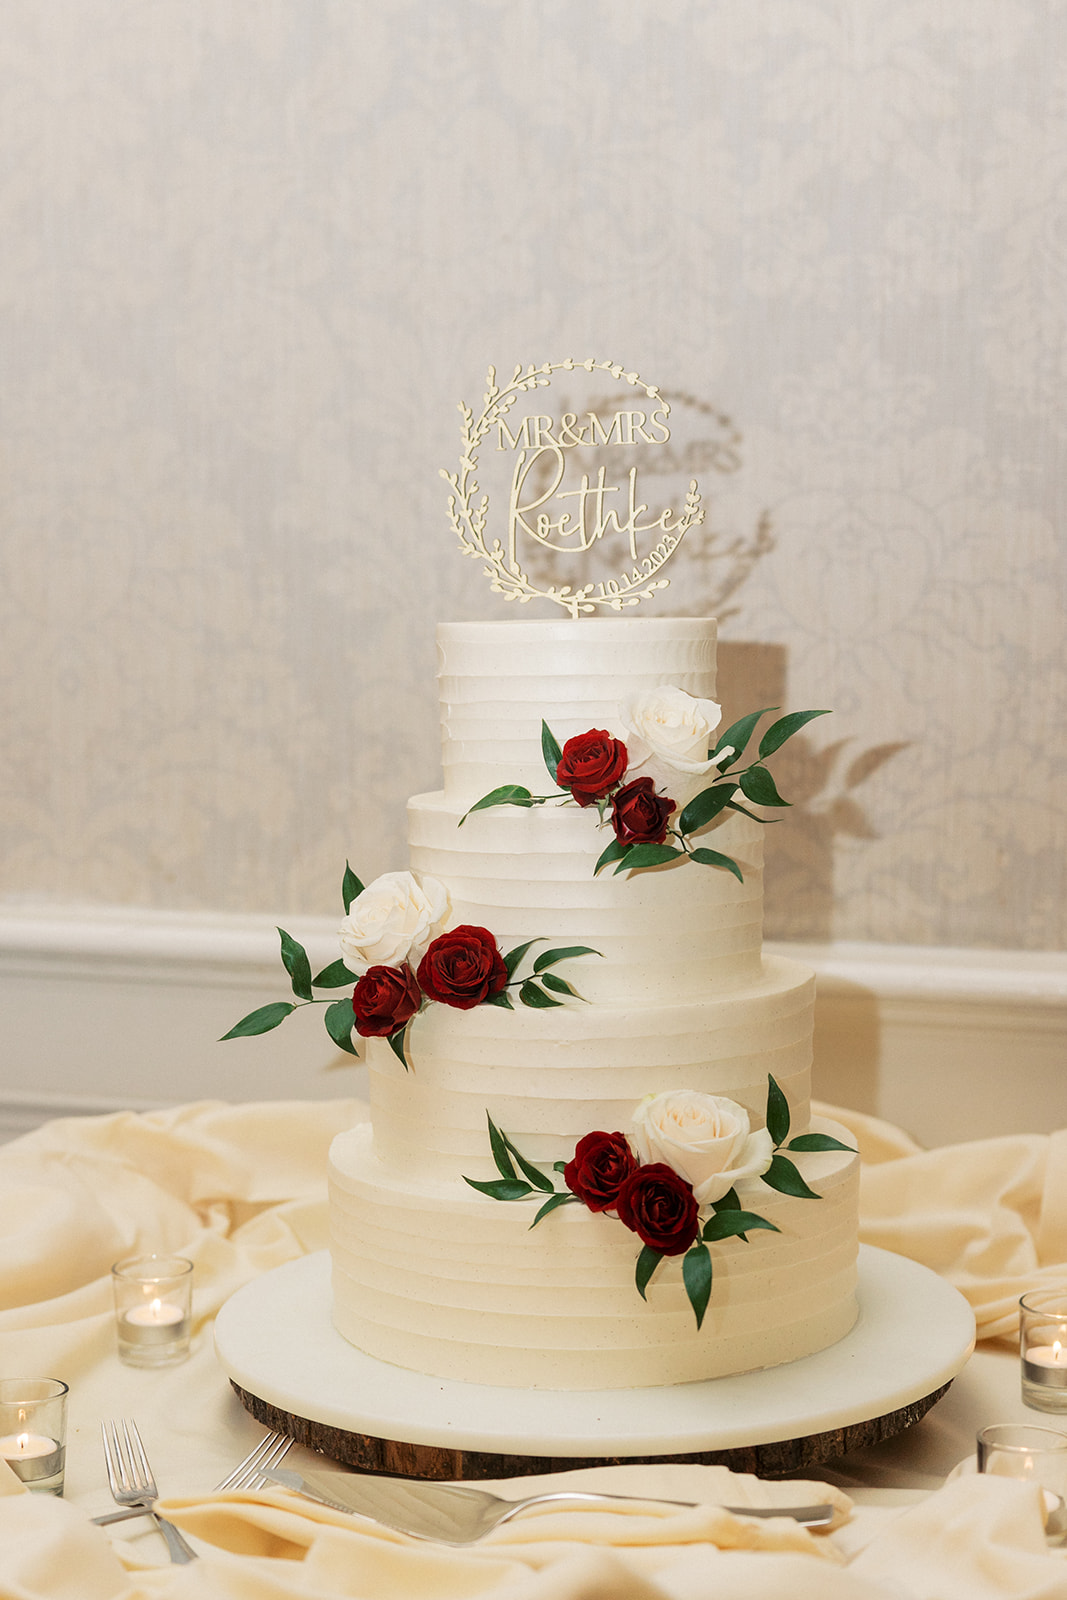 Details of a 4 tier wedding cake with red and white roses and custom topper